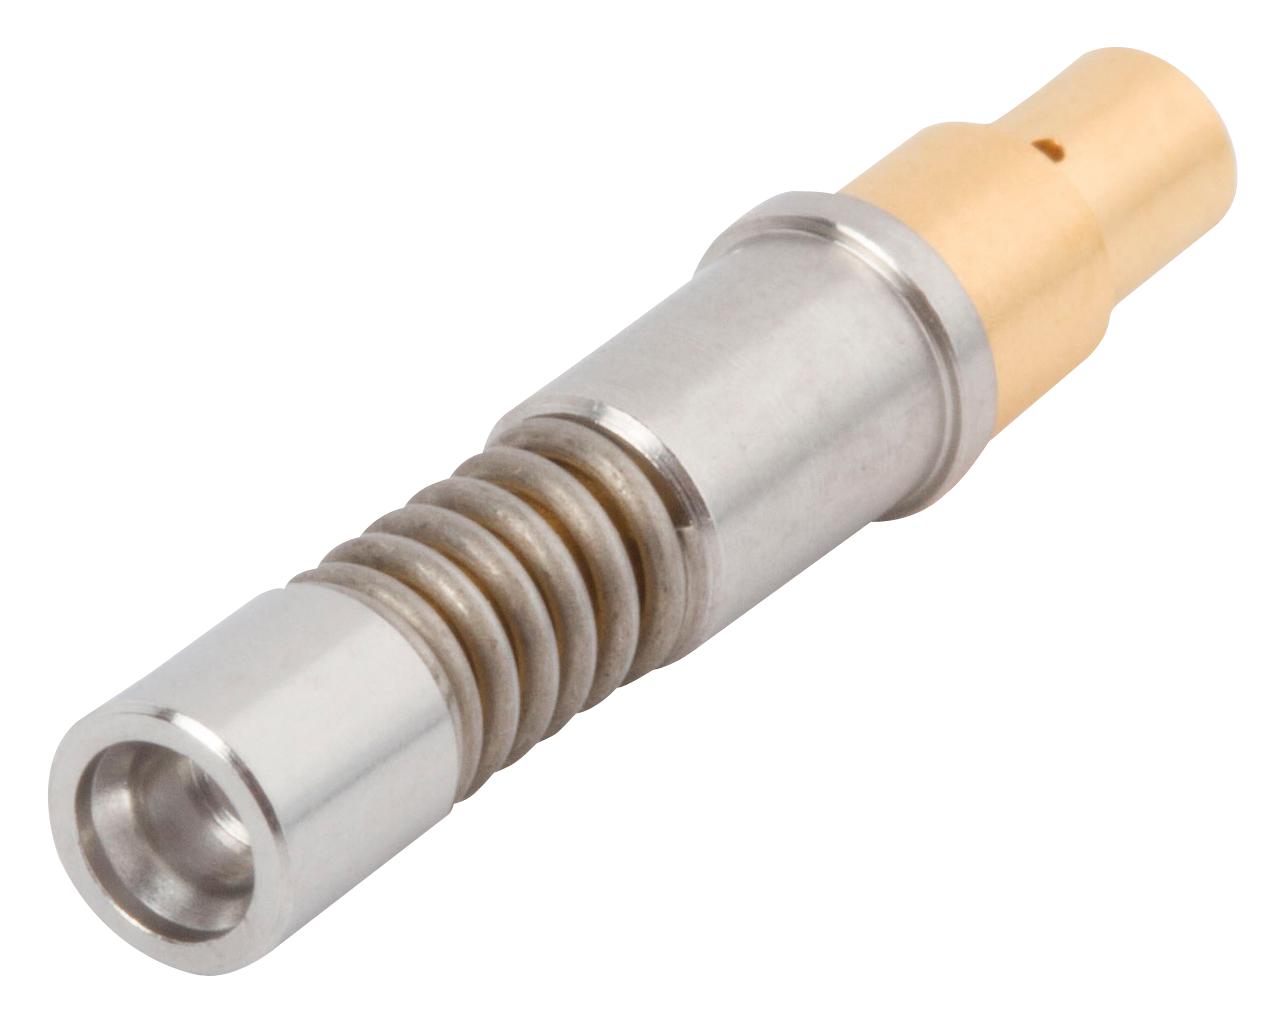 SF3211-6004 RF COAXIAL, SMPM JACK, 50 OHM, CABLE AMPHENOL SV MICROWAVE